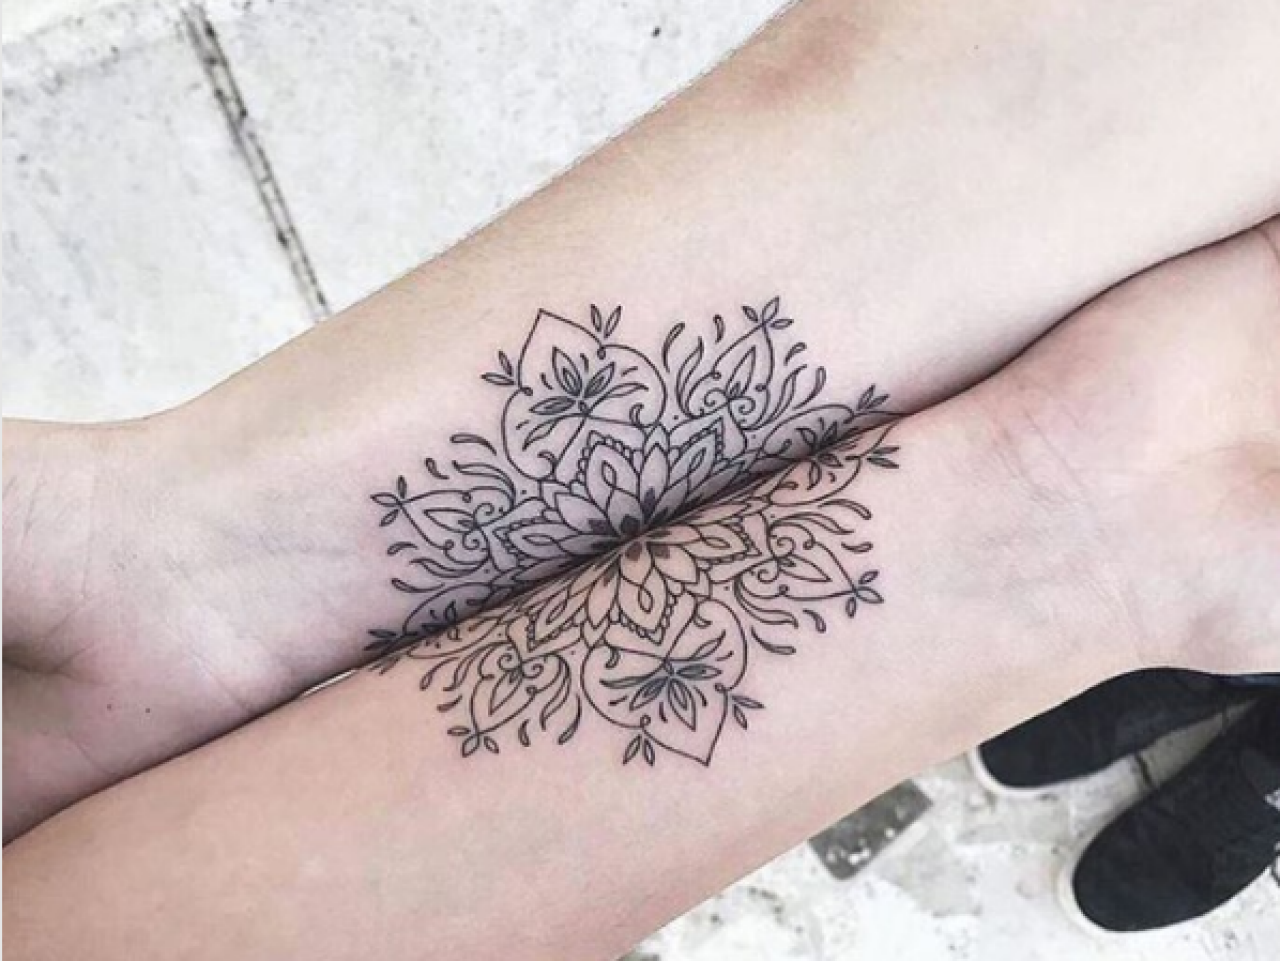 5 Ideas for Best Friend Tattoos That Are Actually Awesome